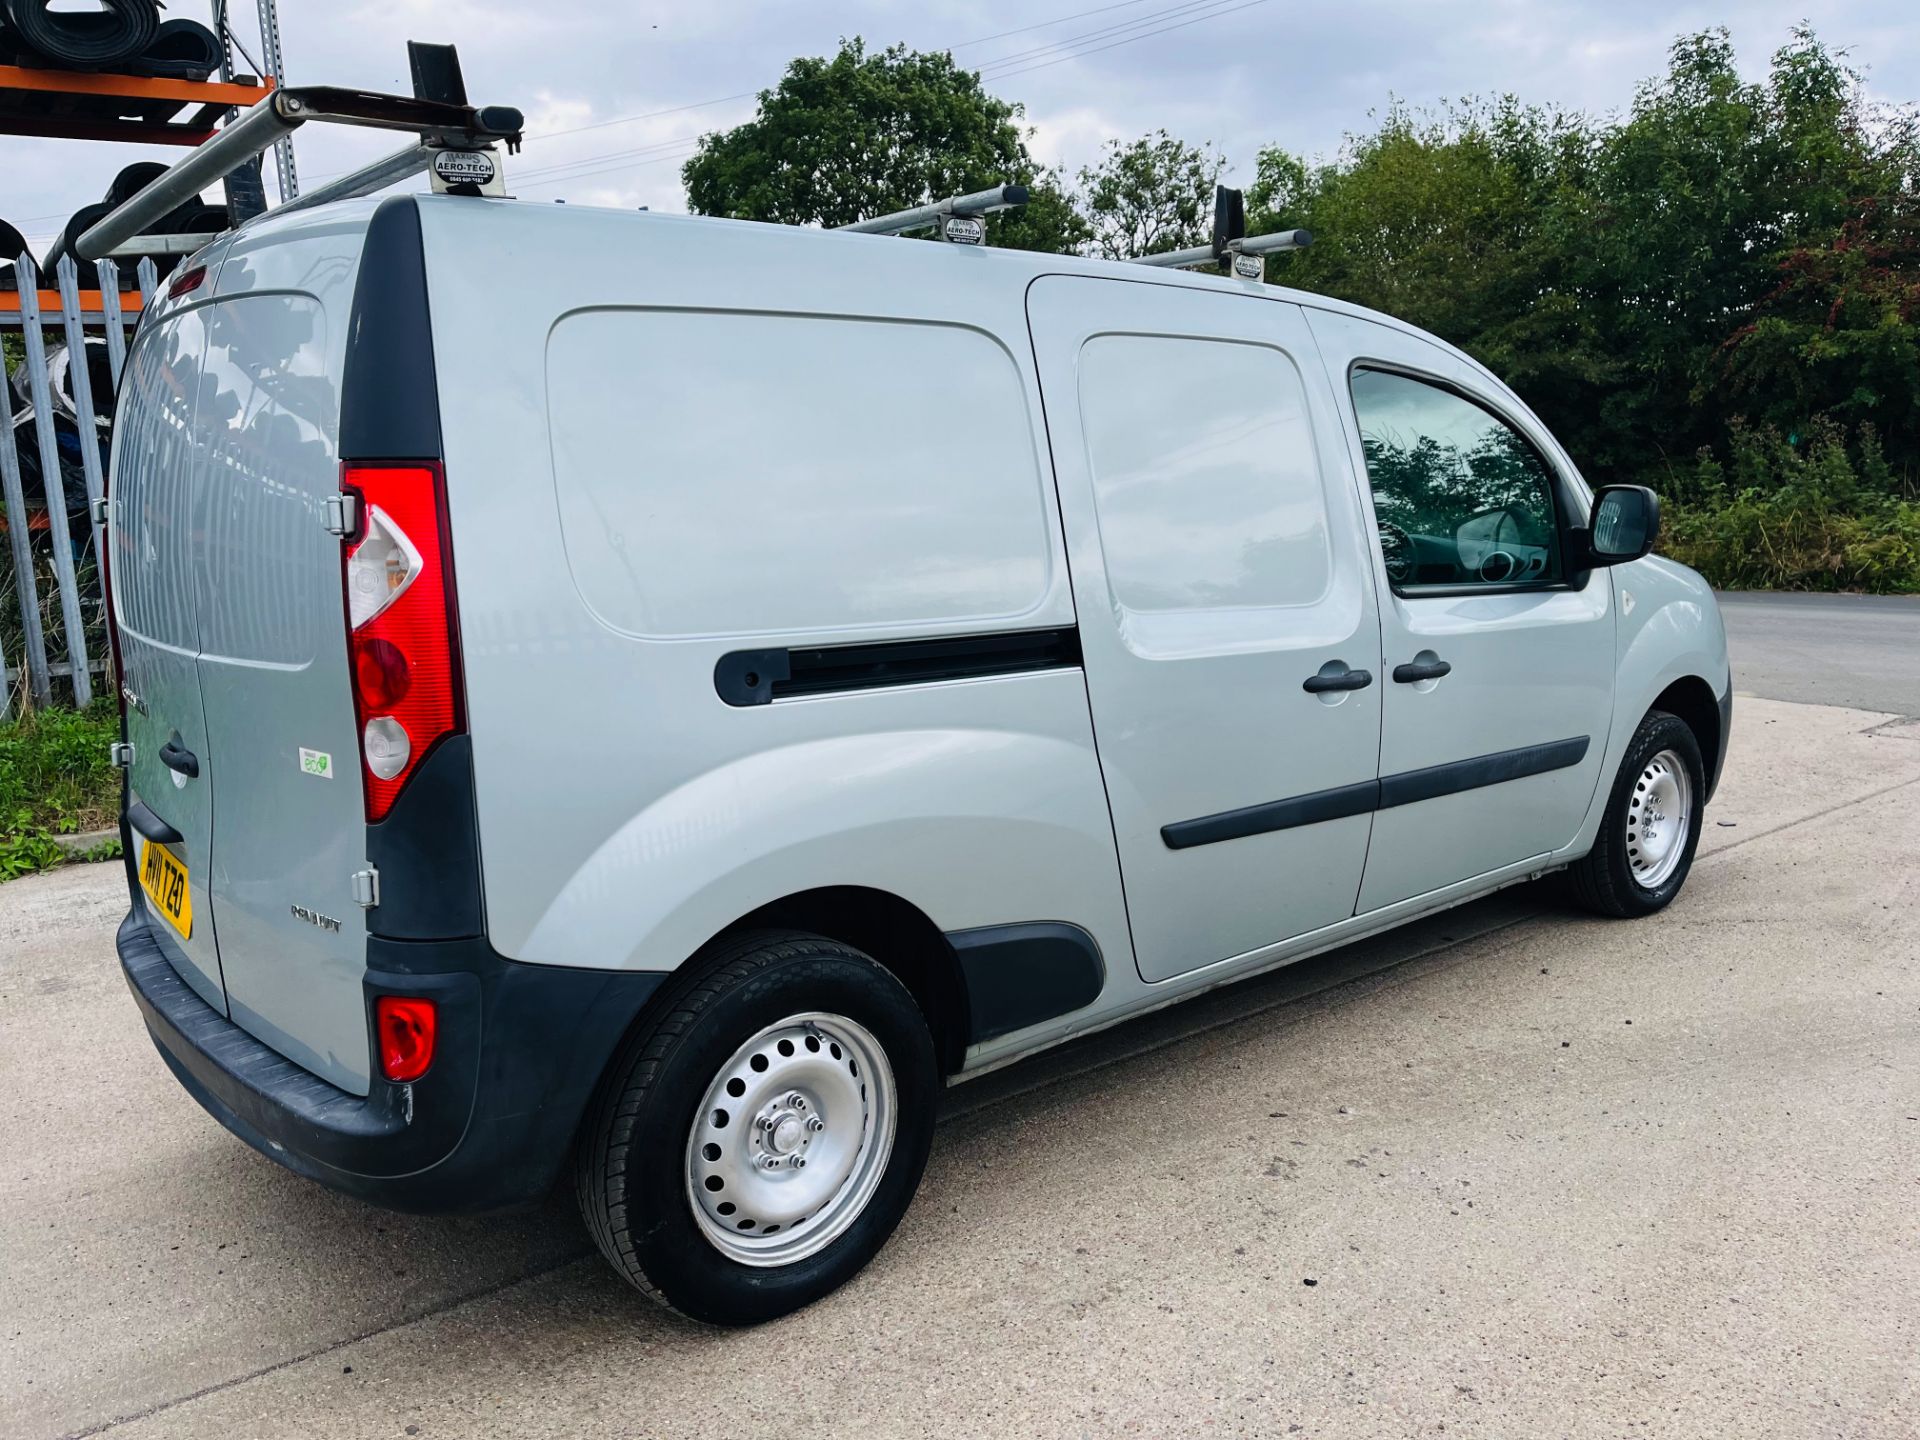 (Reserve Met) Renault Kangoo dci "Maxi Plus" 11reg - Rare and hard to find a Maxi Plus model -No Vat - Image 10 of 18